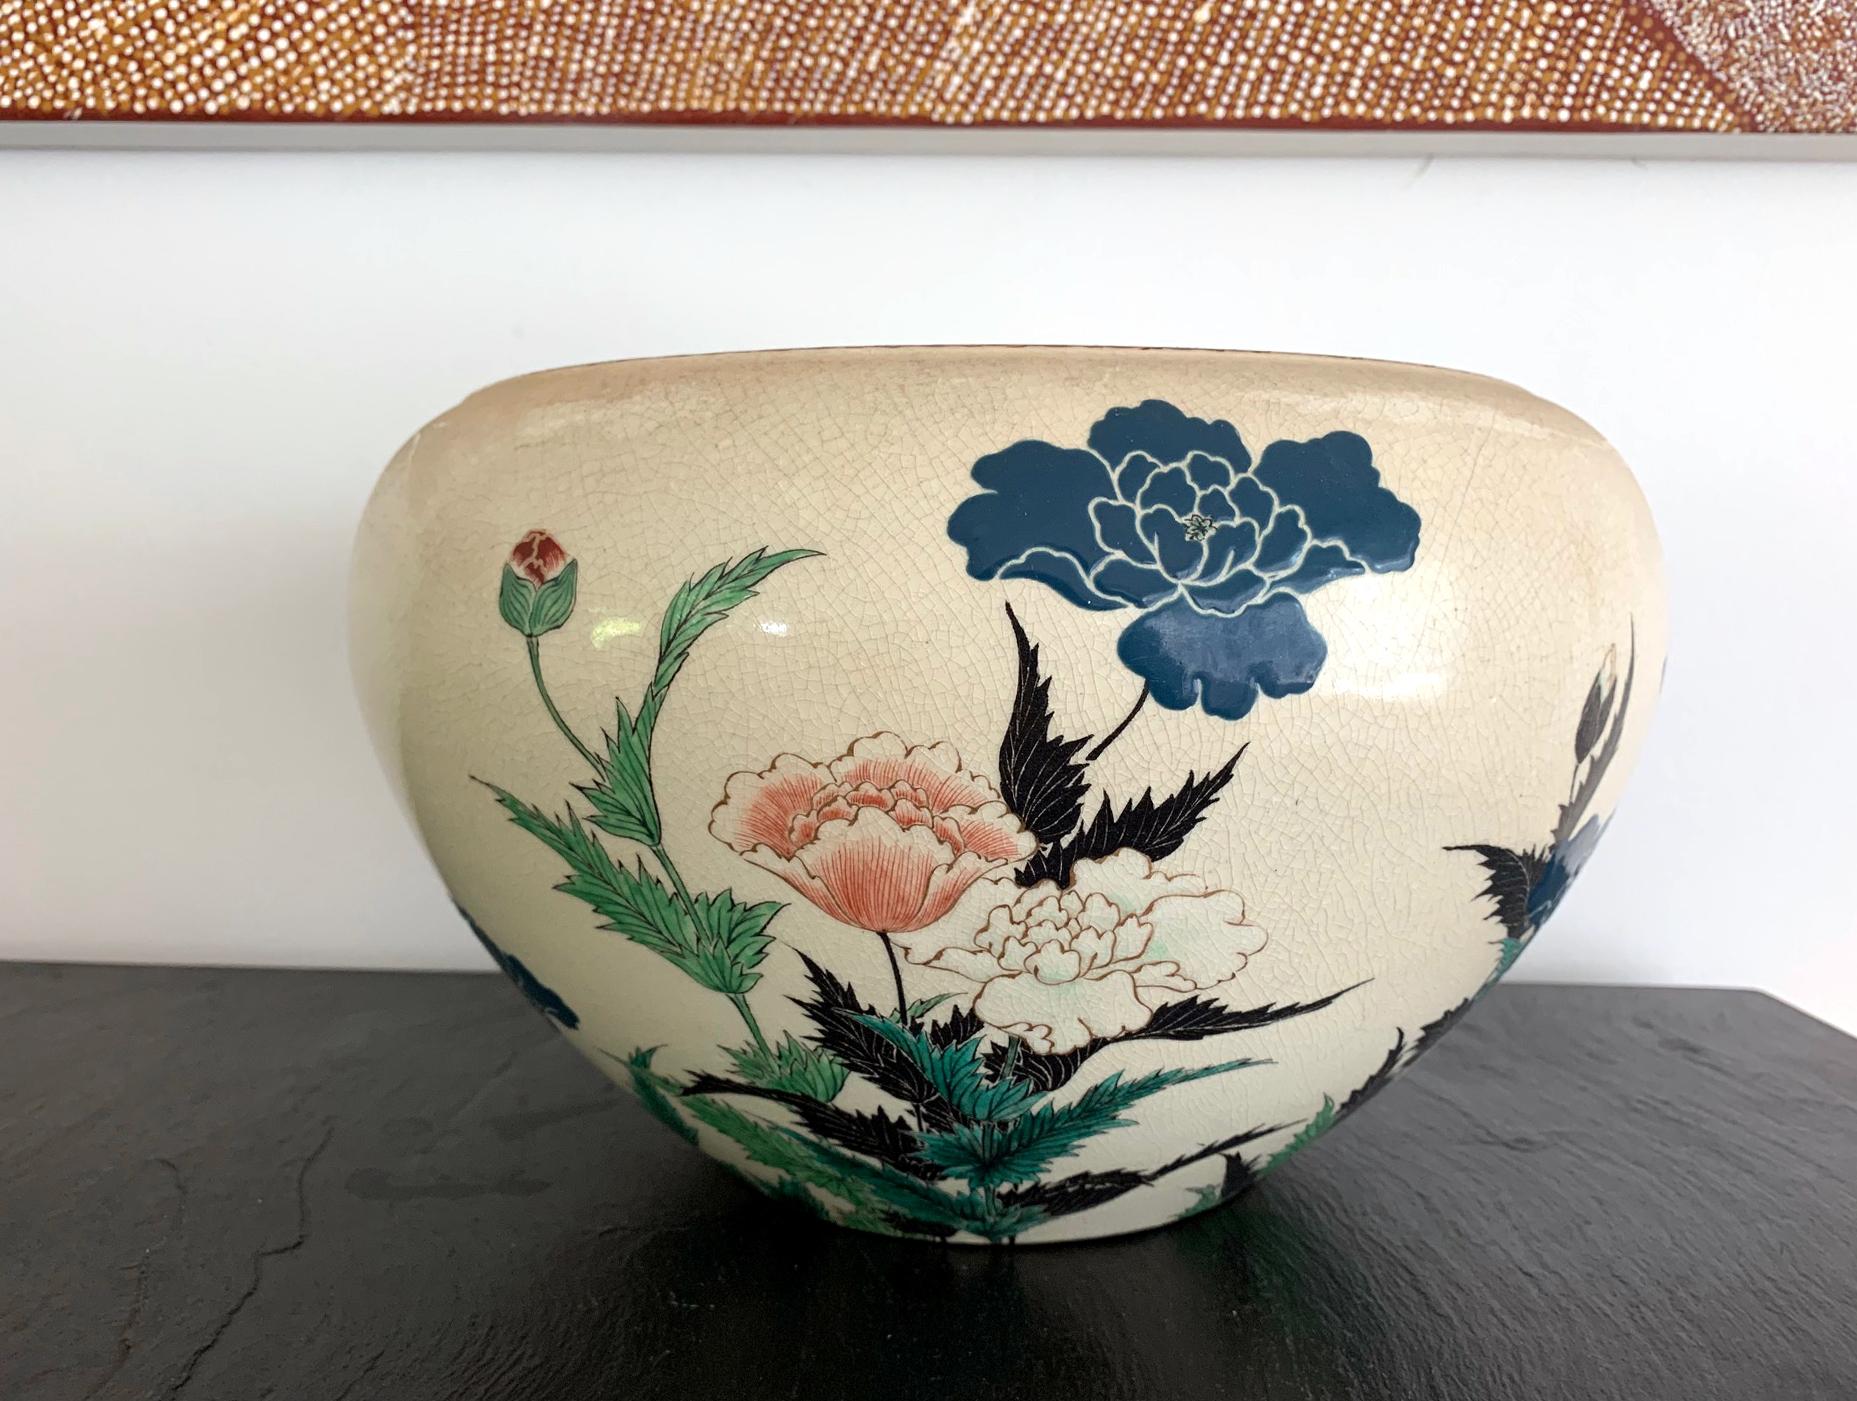 A beautifully crafted large ceramic bowl as a centerpiece by Okumura Shozan (1842-1905) in the Kyo-yaki (kyoto ware) style. A Classic ovoid form with flatly inverted rim of swirled scroll pattern, the piece was decorated with naturalistic floral